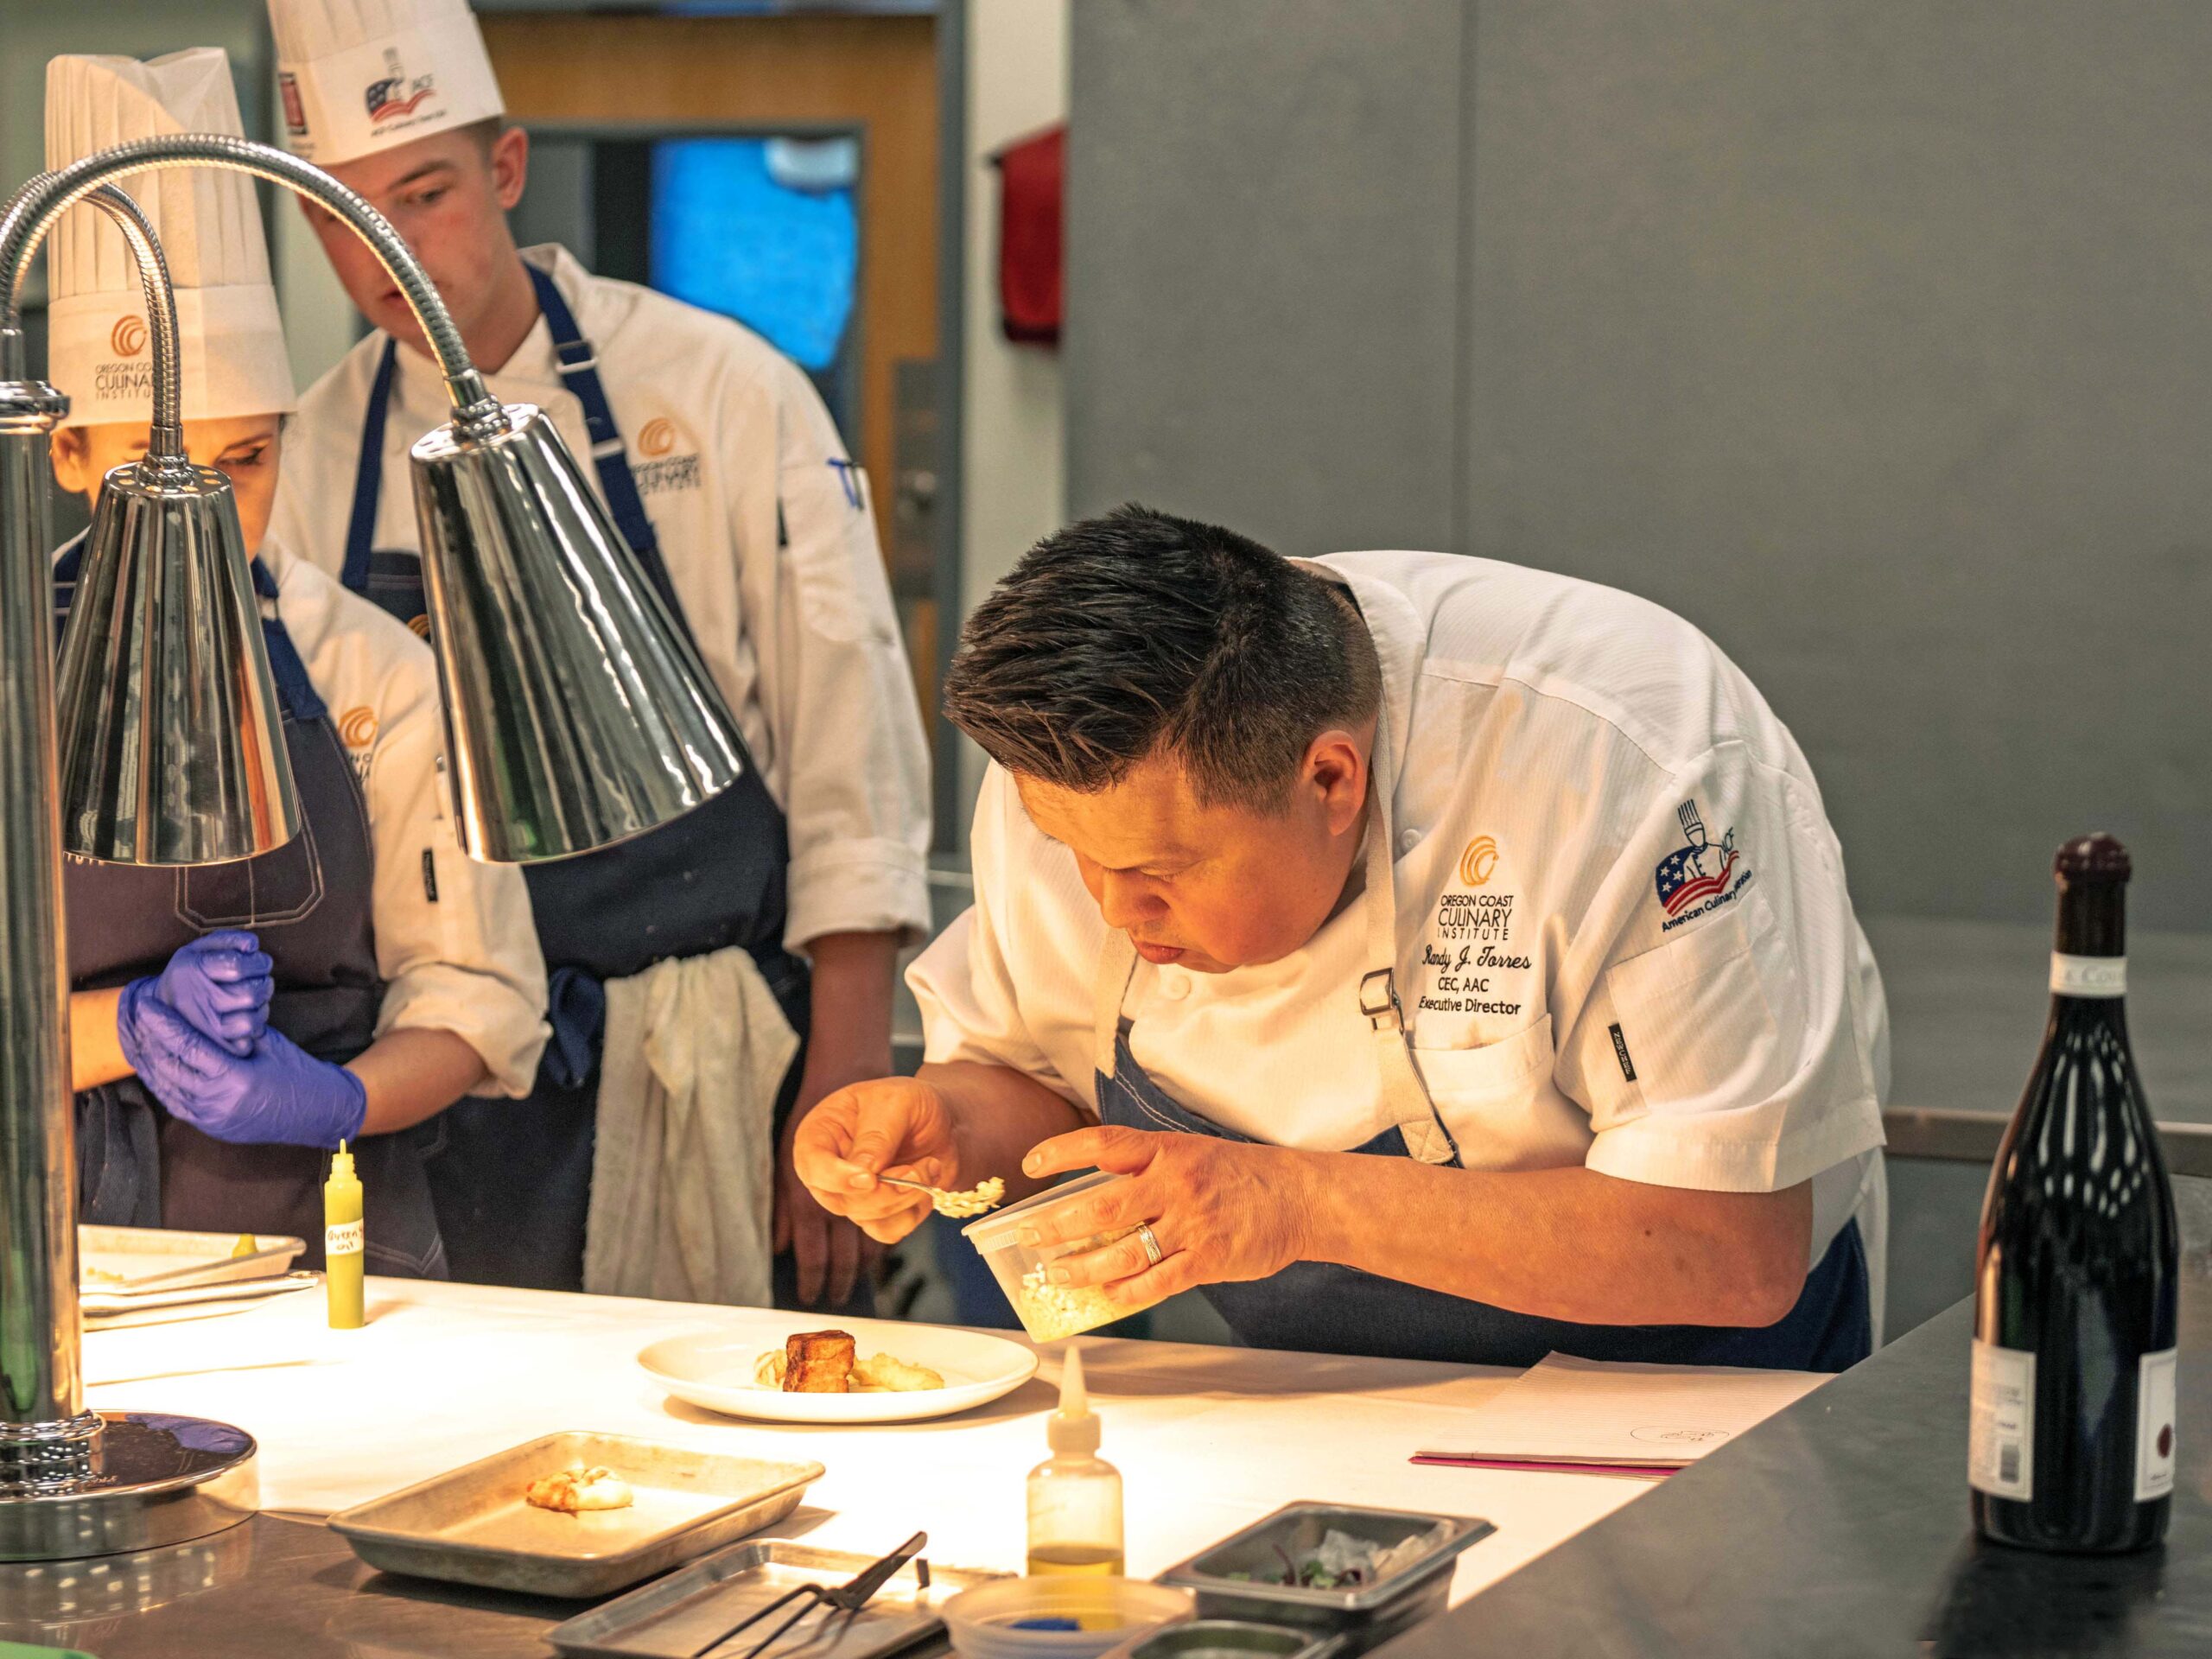 OCCI executive chef randy torres demonstrates plating to student chefs in preparation for the winemakers dinner